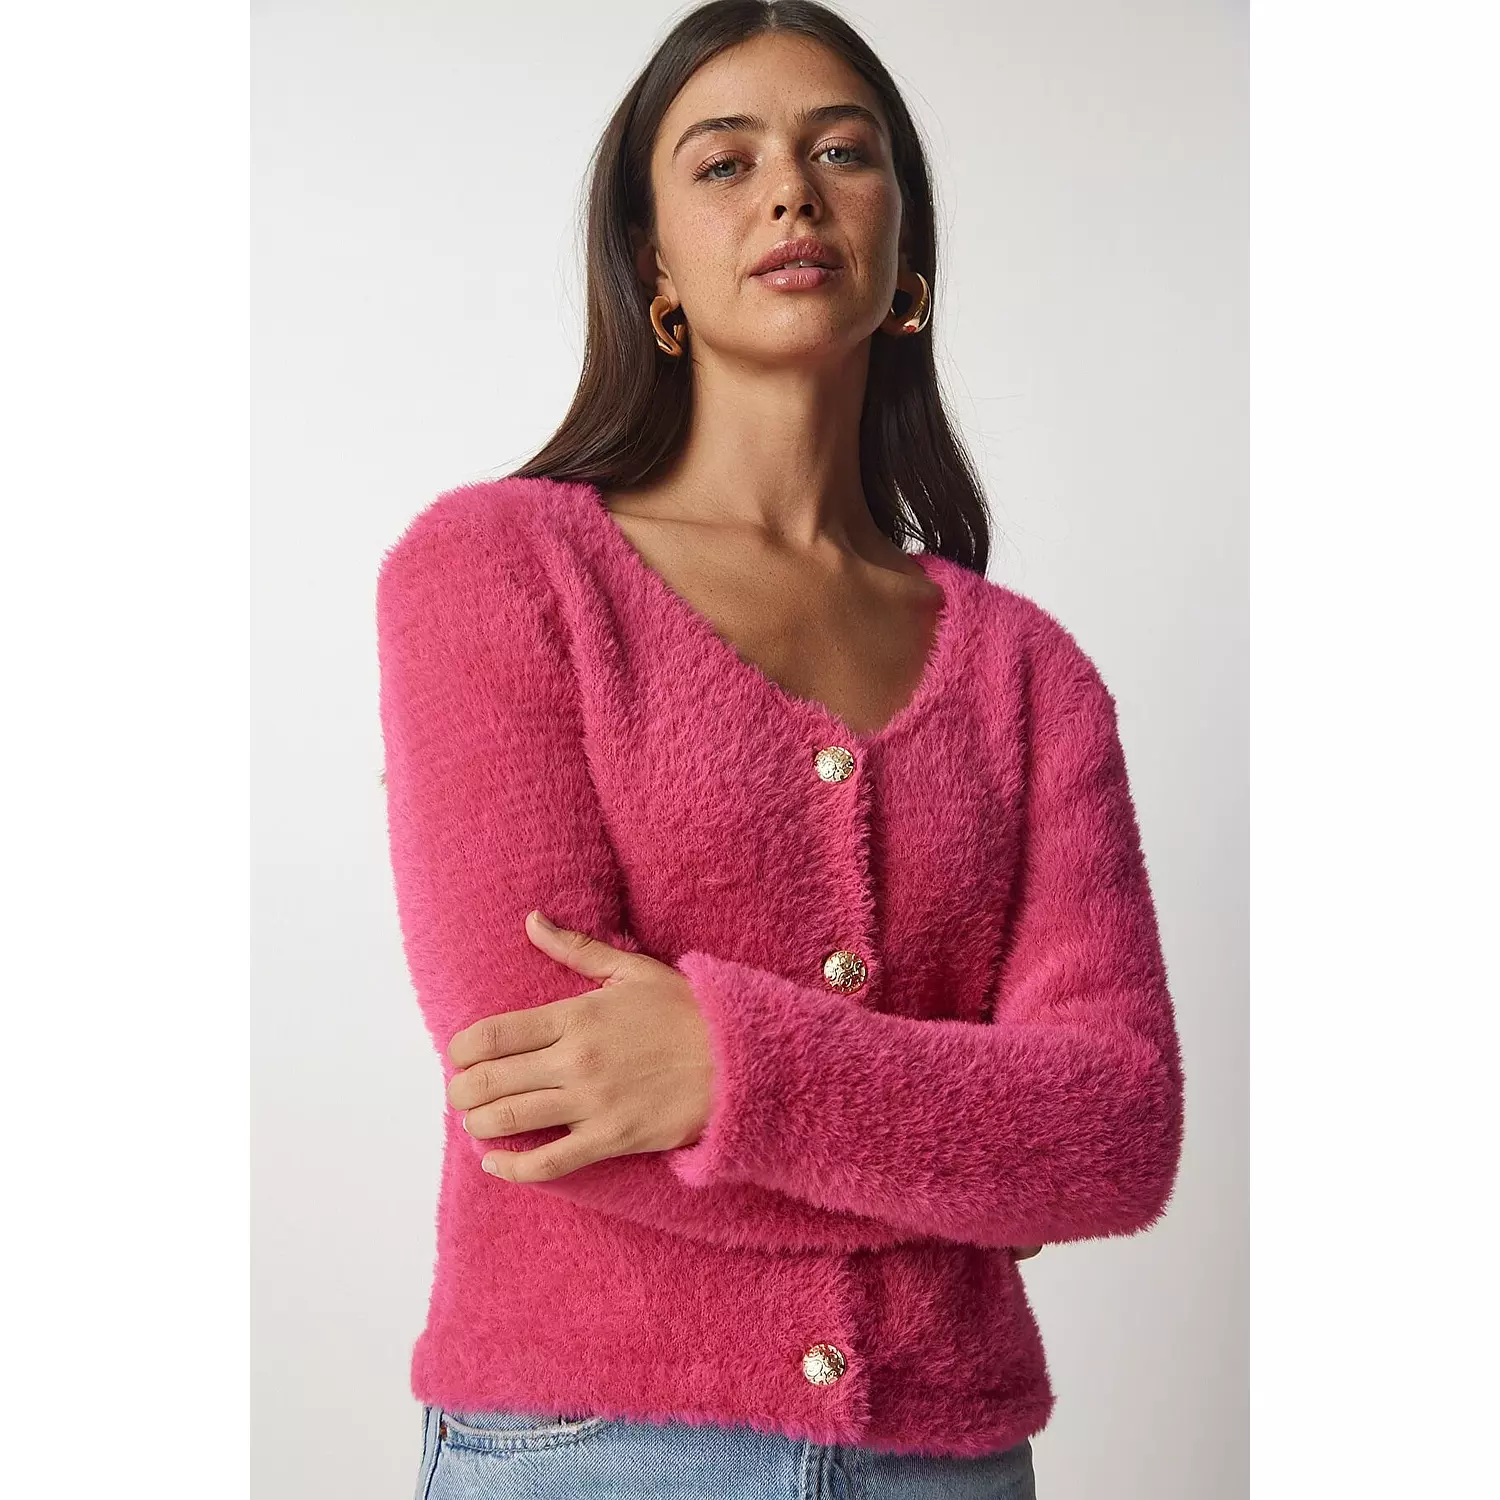 Women's Pink Soft Bearded Knitwear Cardigan hover image